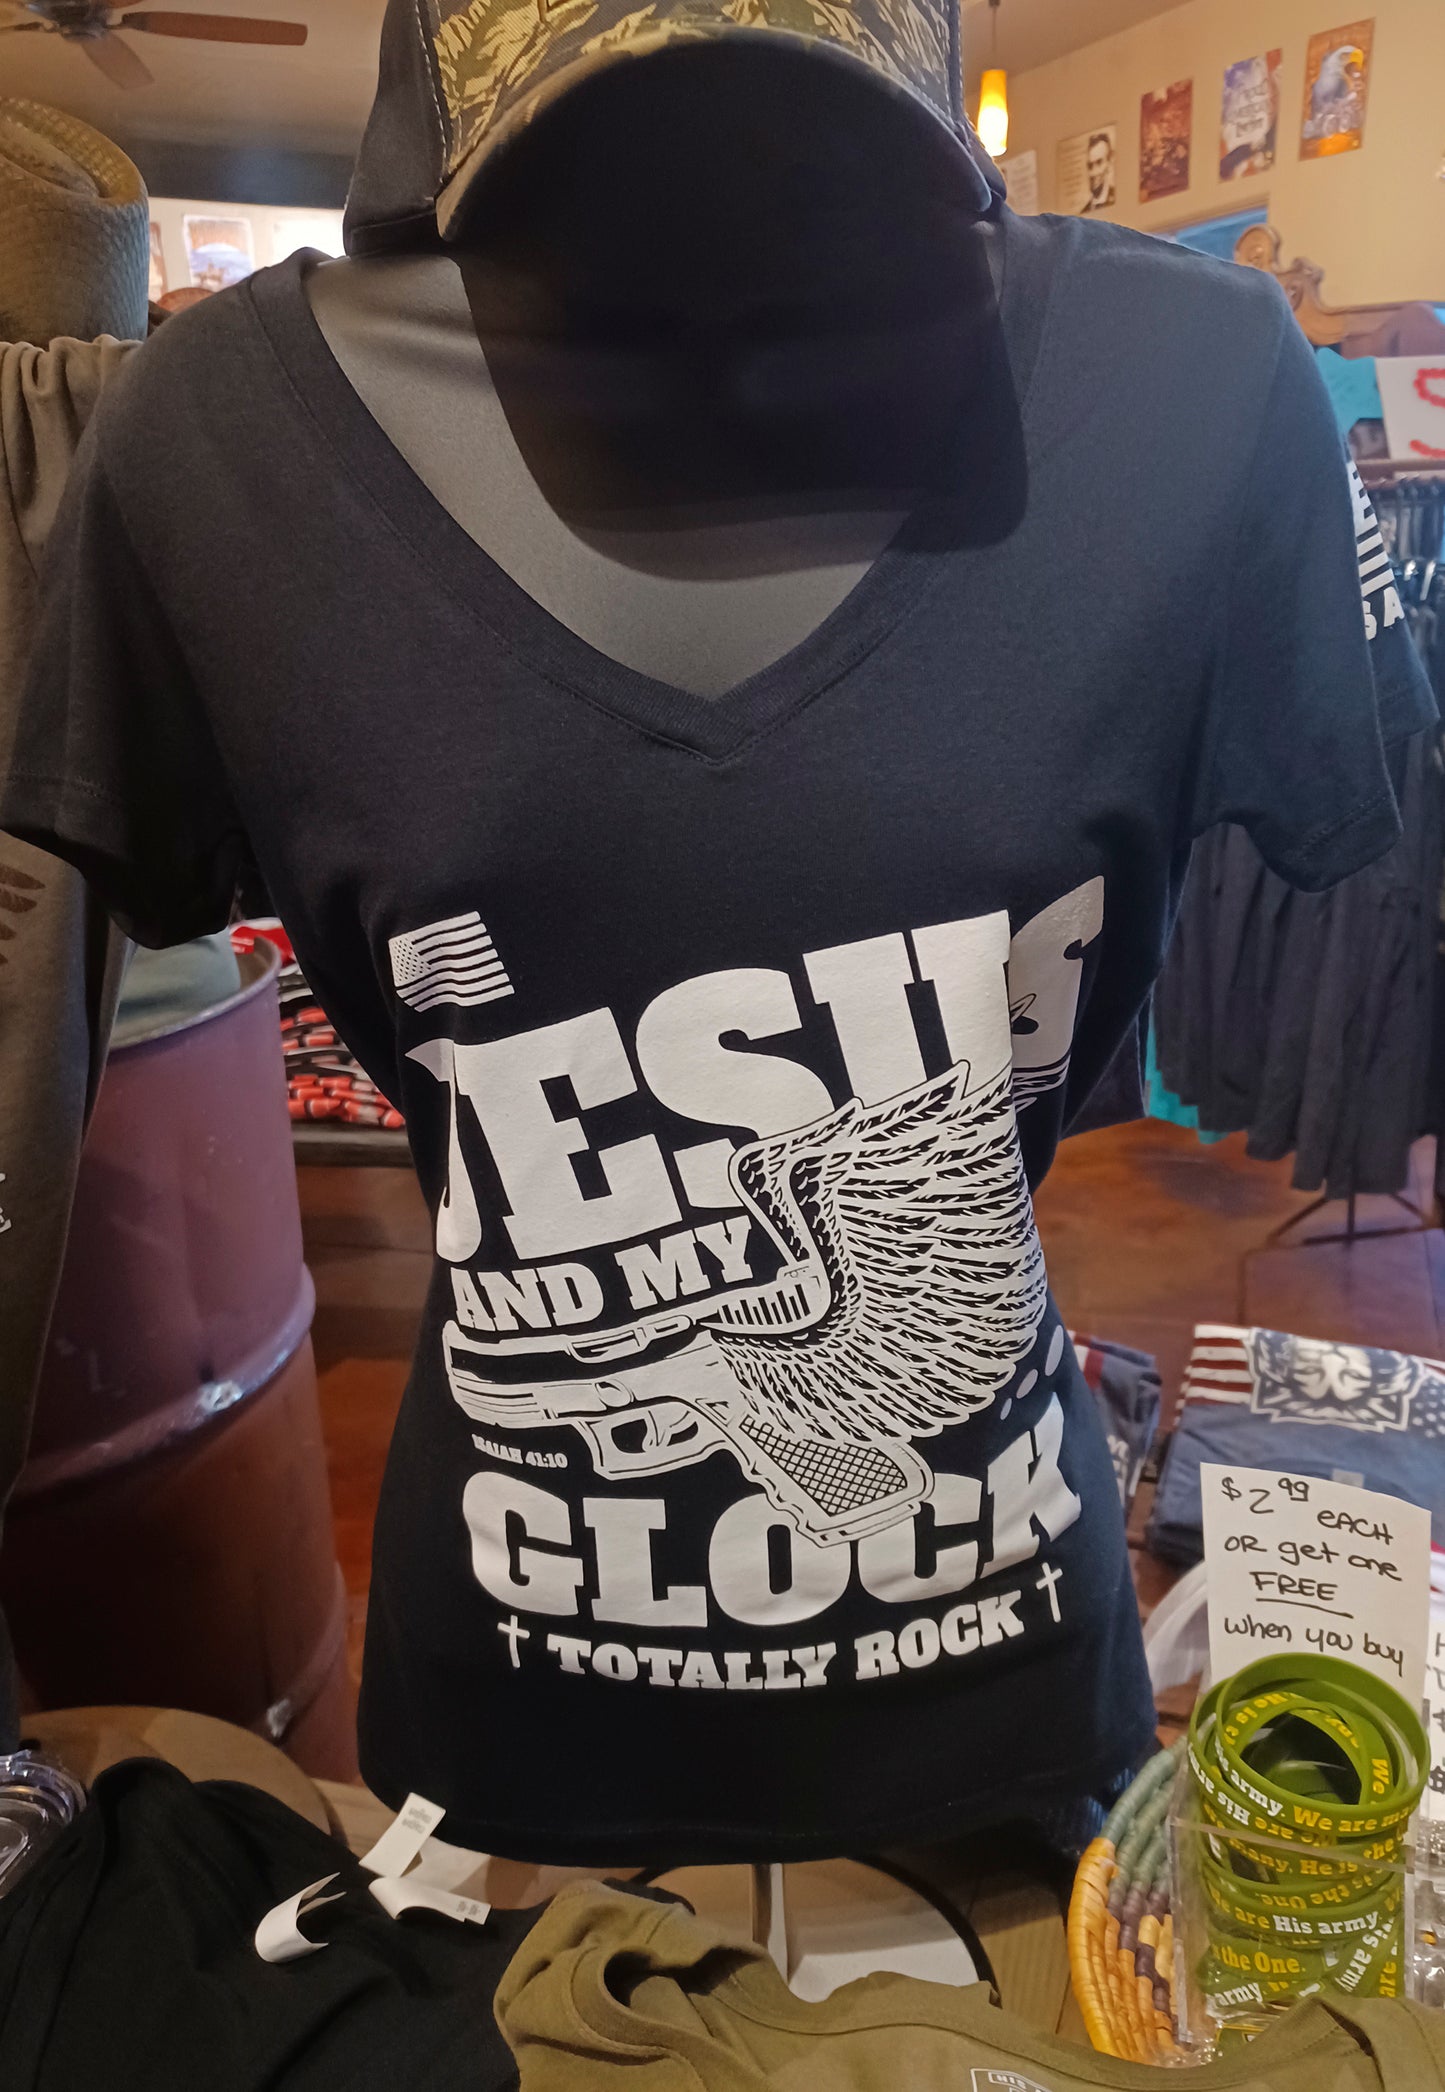 Jesus and my Glock totally rock t-shirt in store